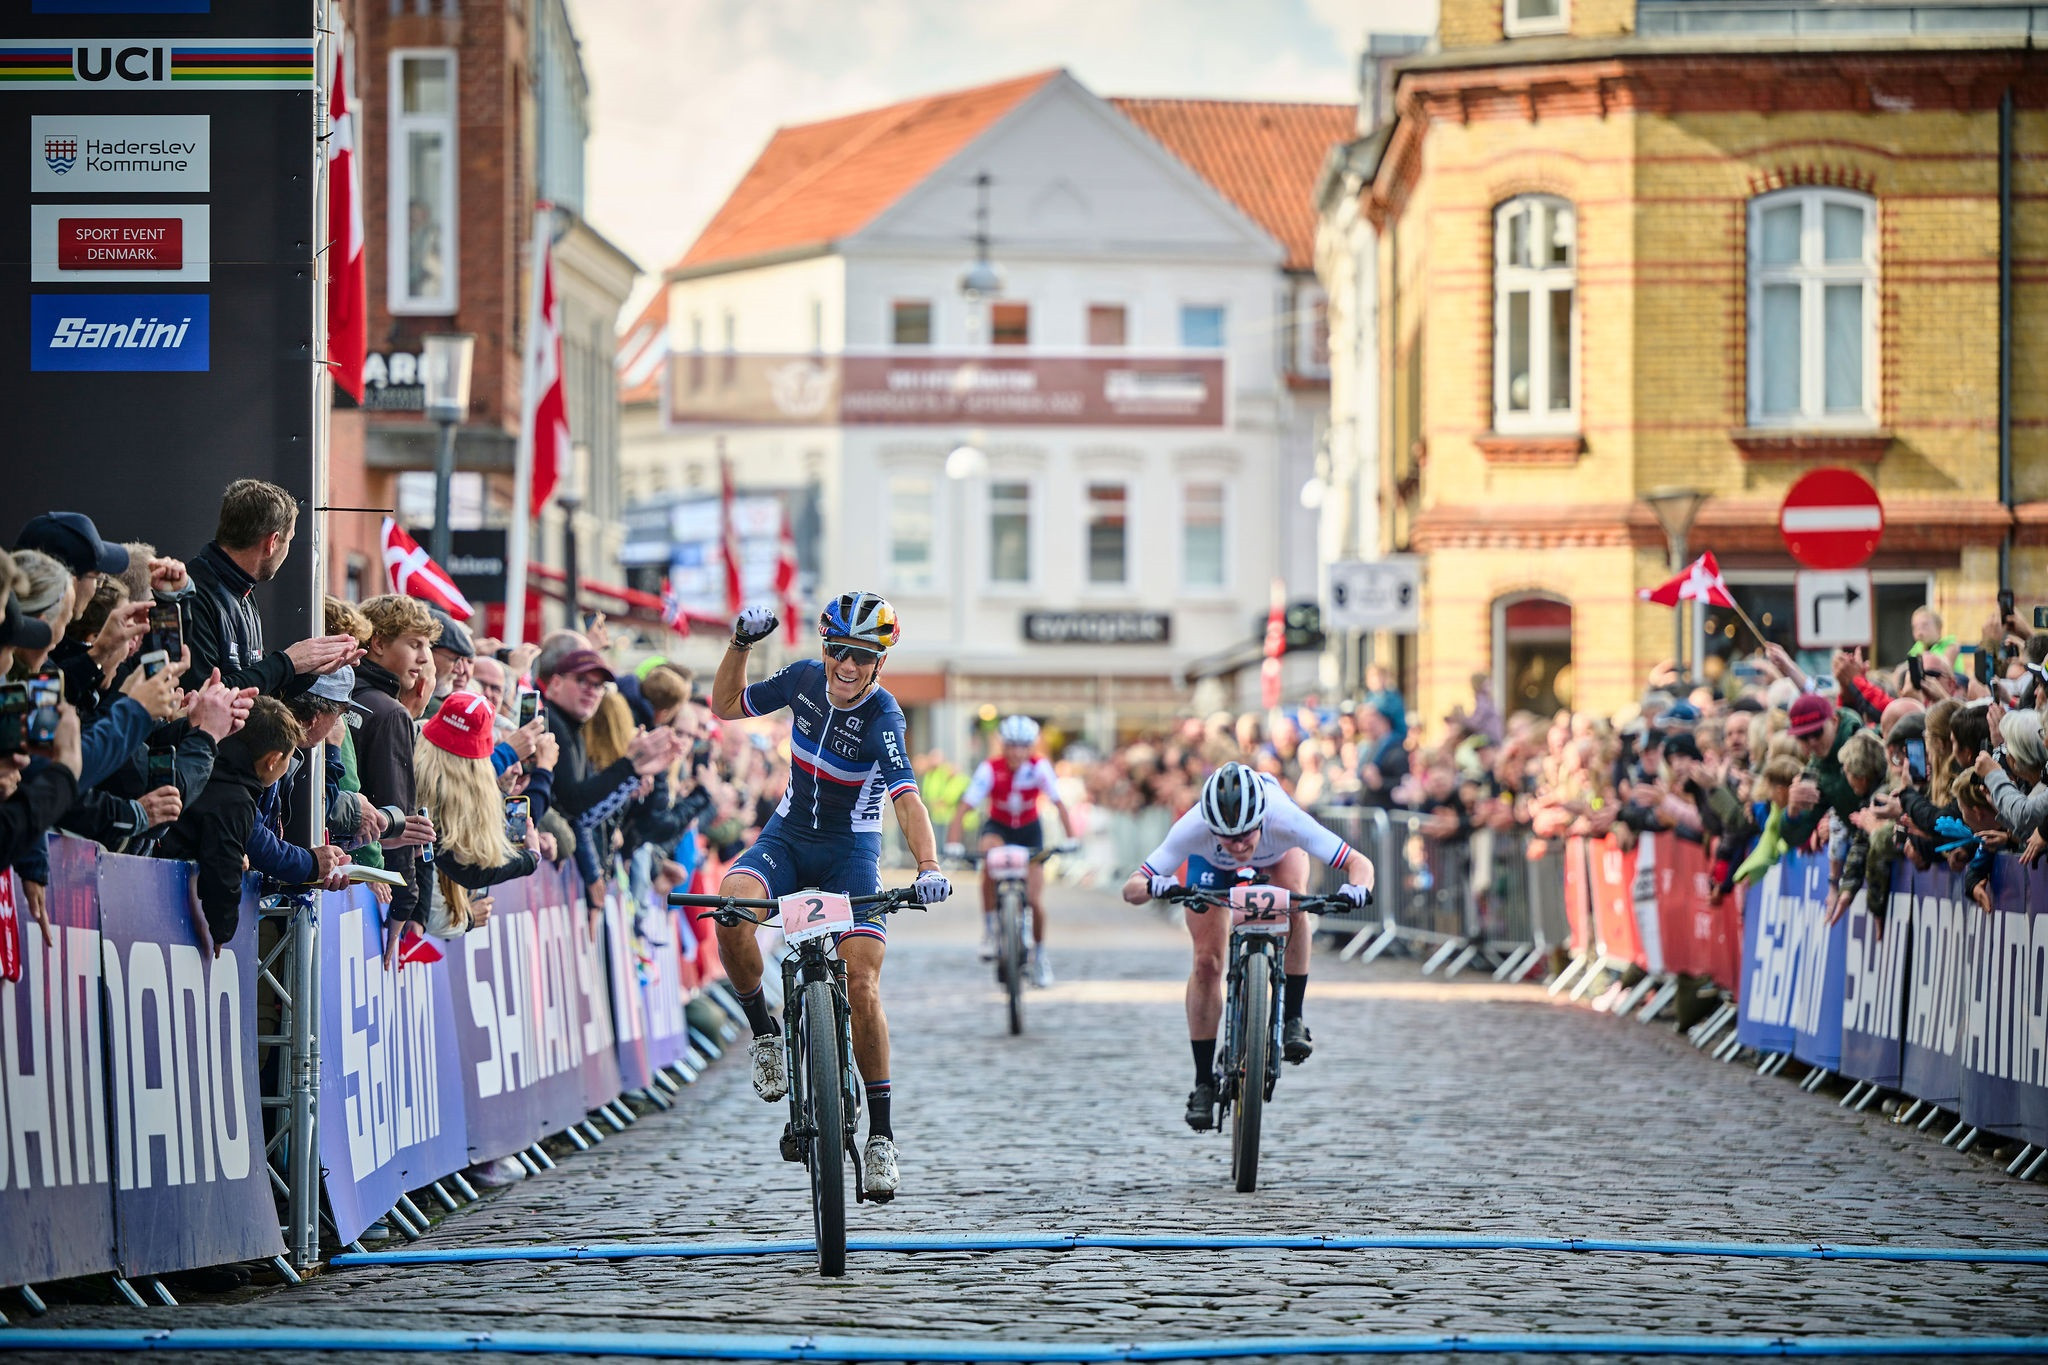 Denmark has staged a number of different major cycling events, including yesterday's UCI Mountain Bike Marathon World Championships ©Ard Jongsma (Triangle Region)